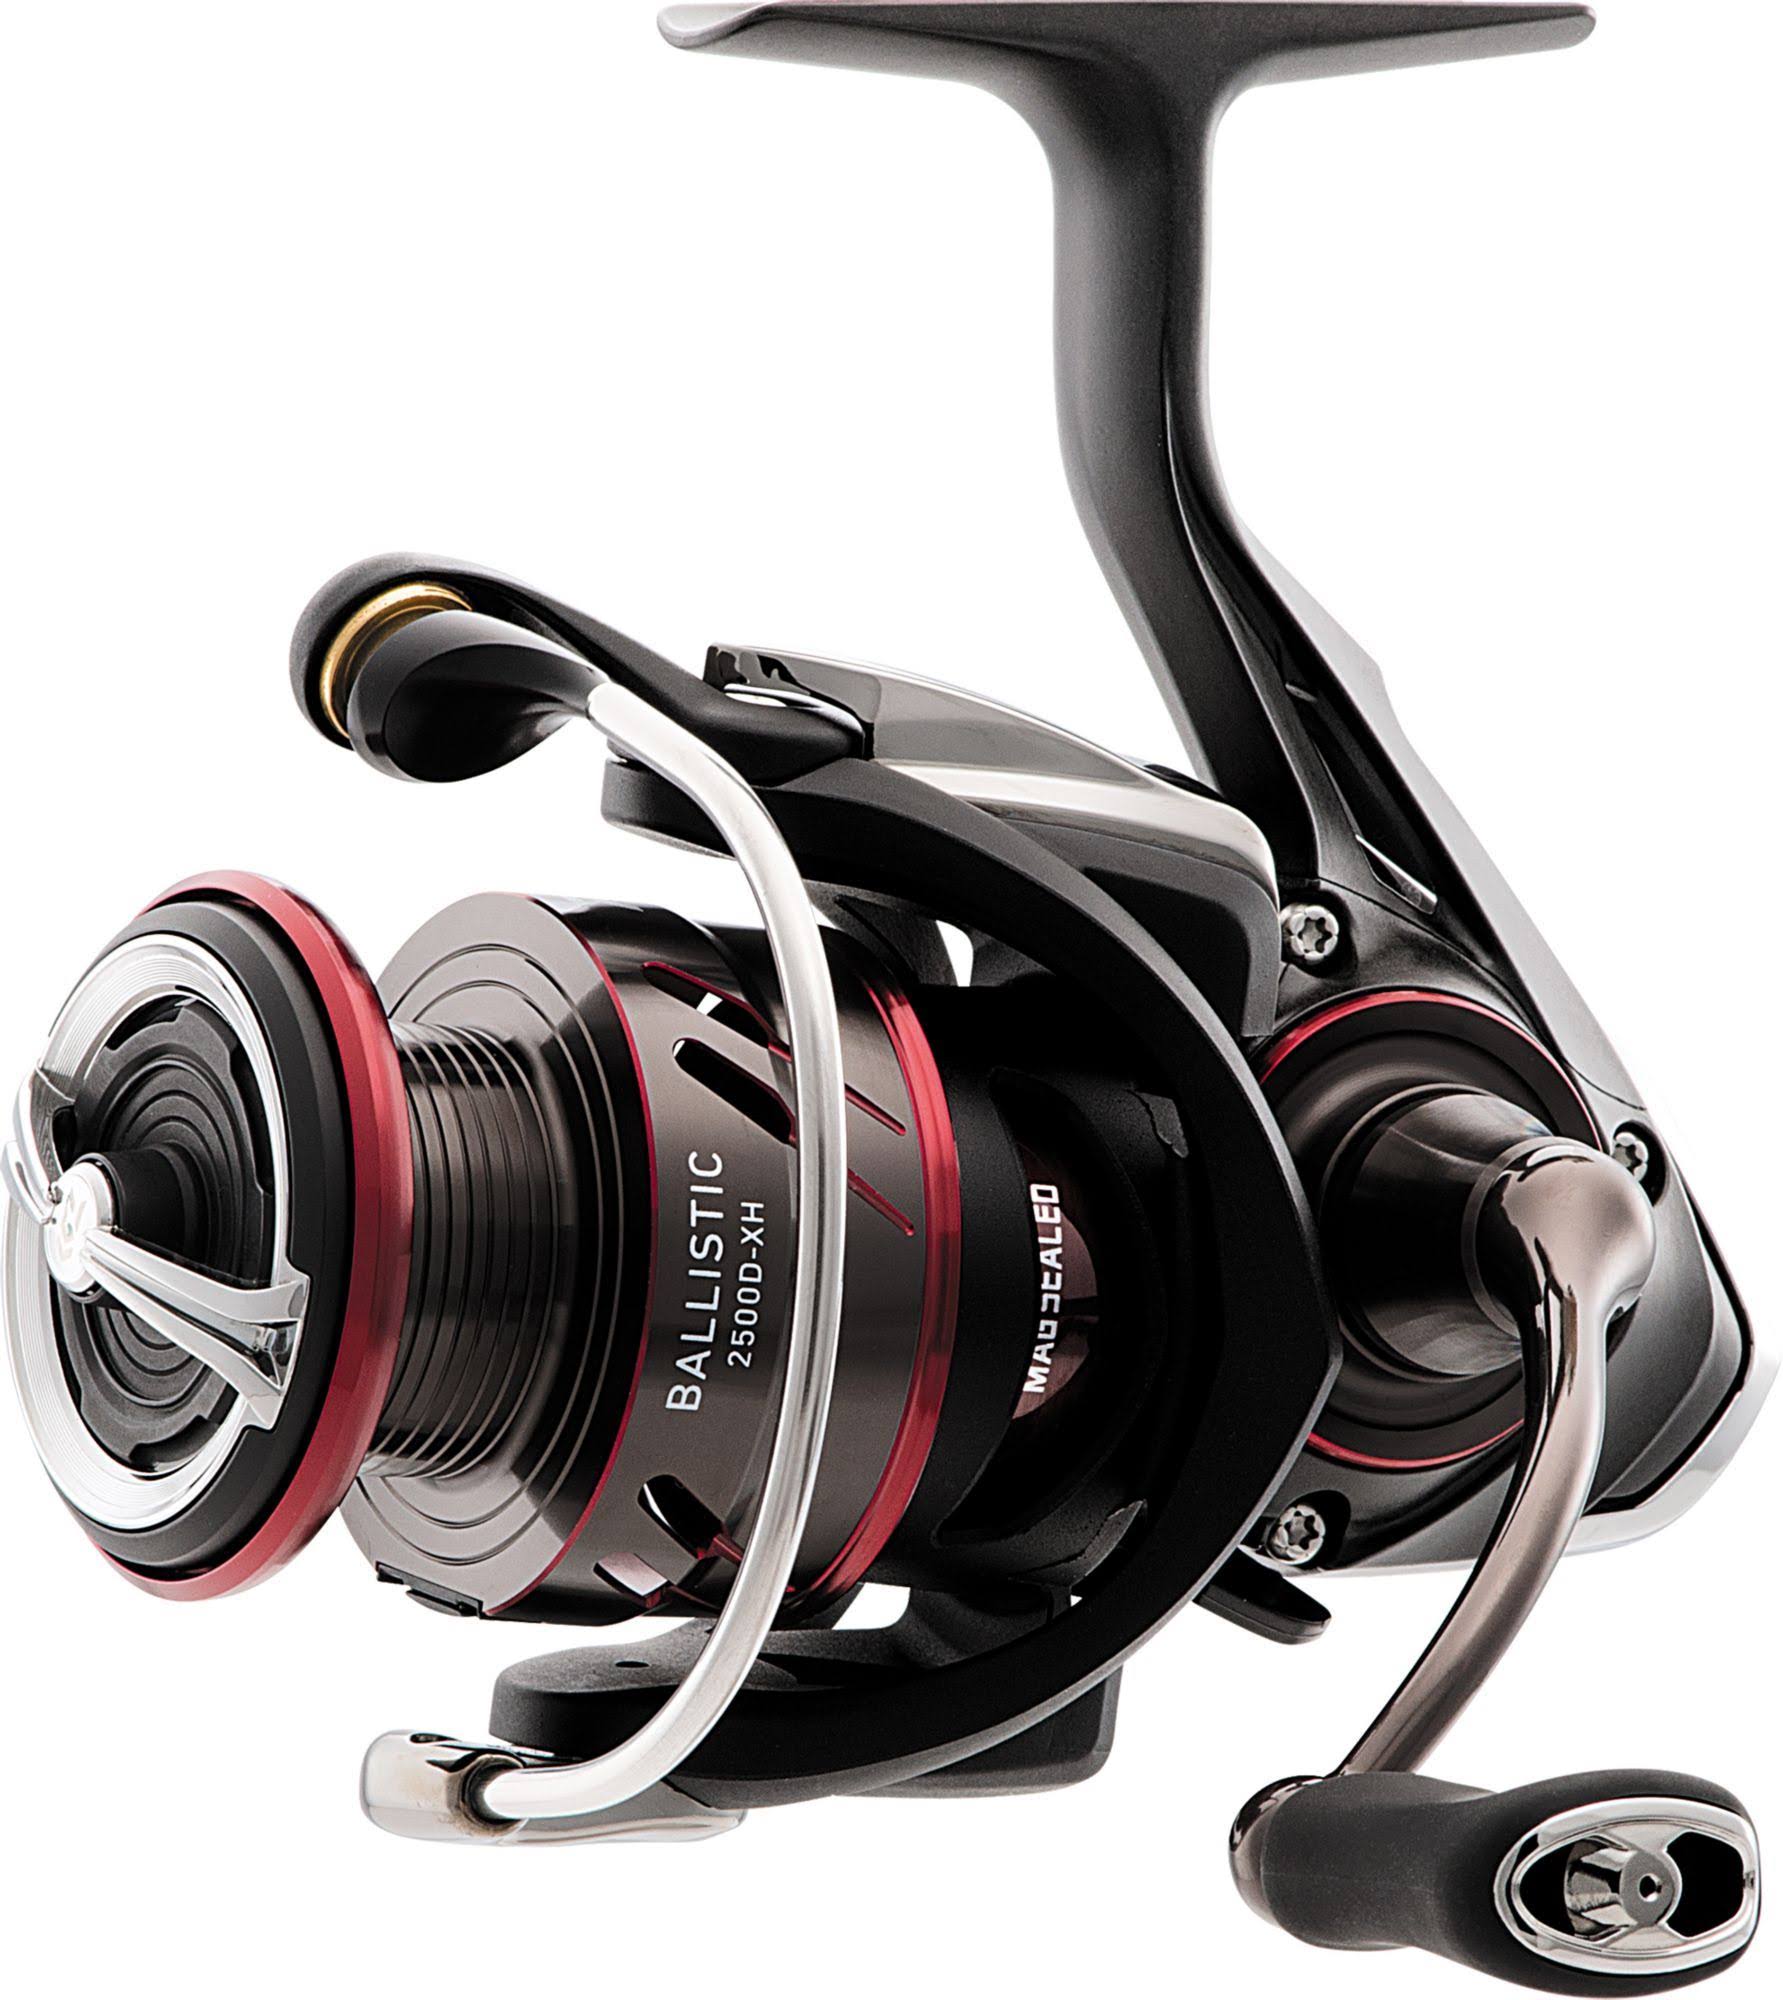 Daiwa Ballistic LT Freshwater Spinning Reel - Left and Right Hand